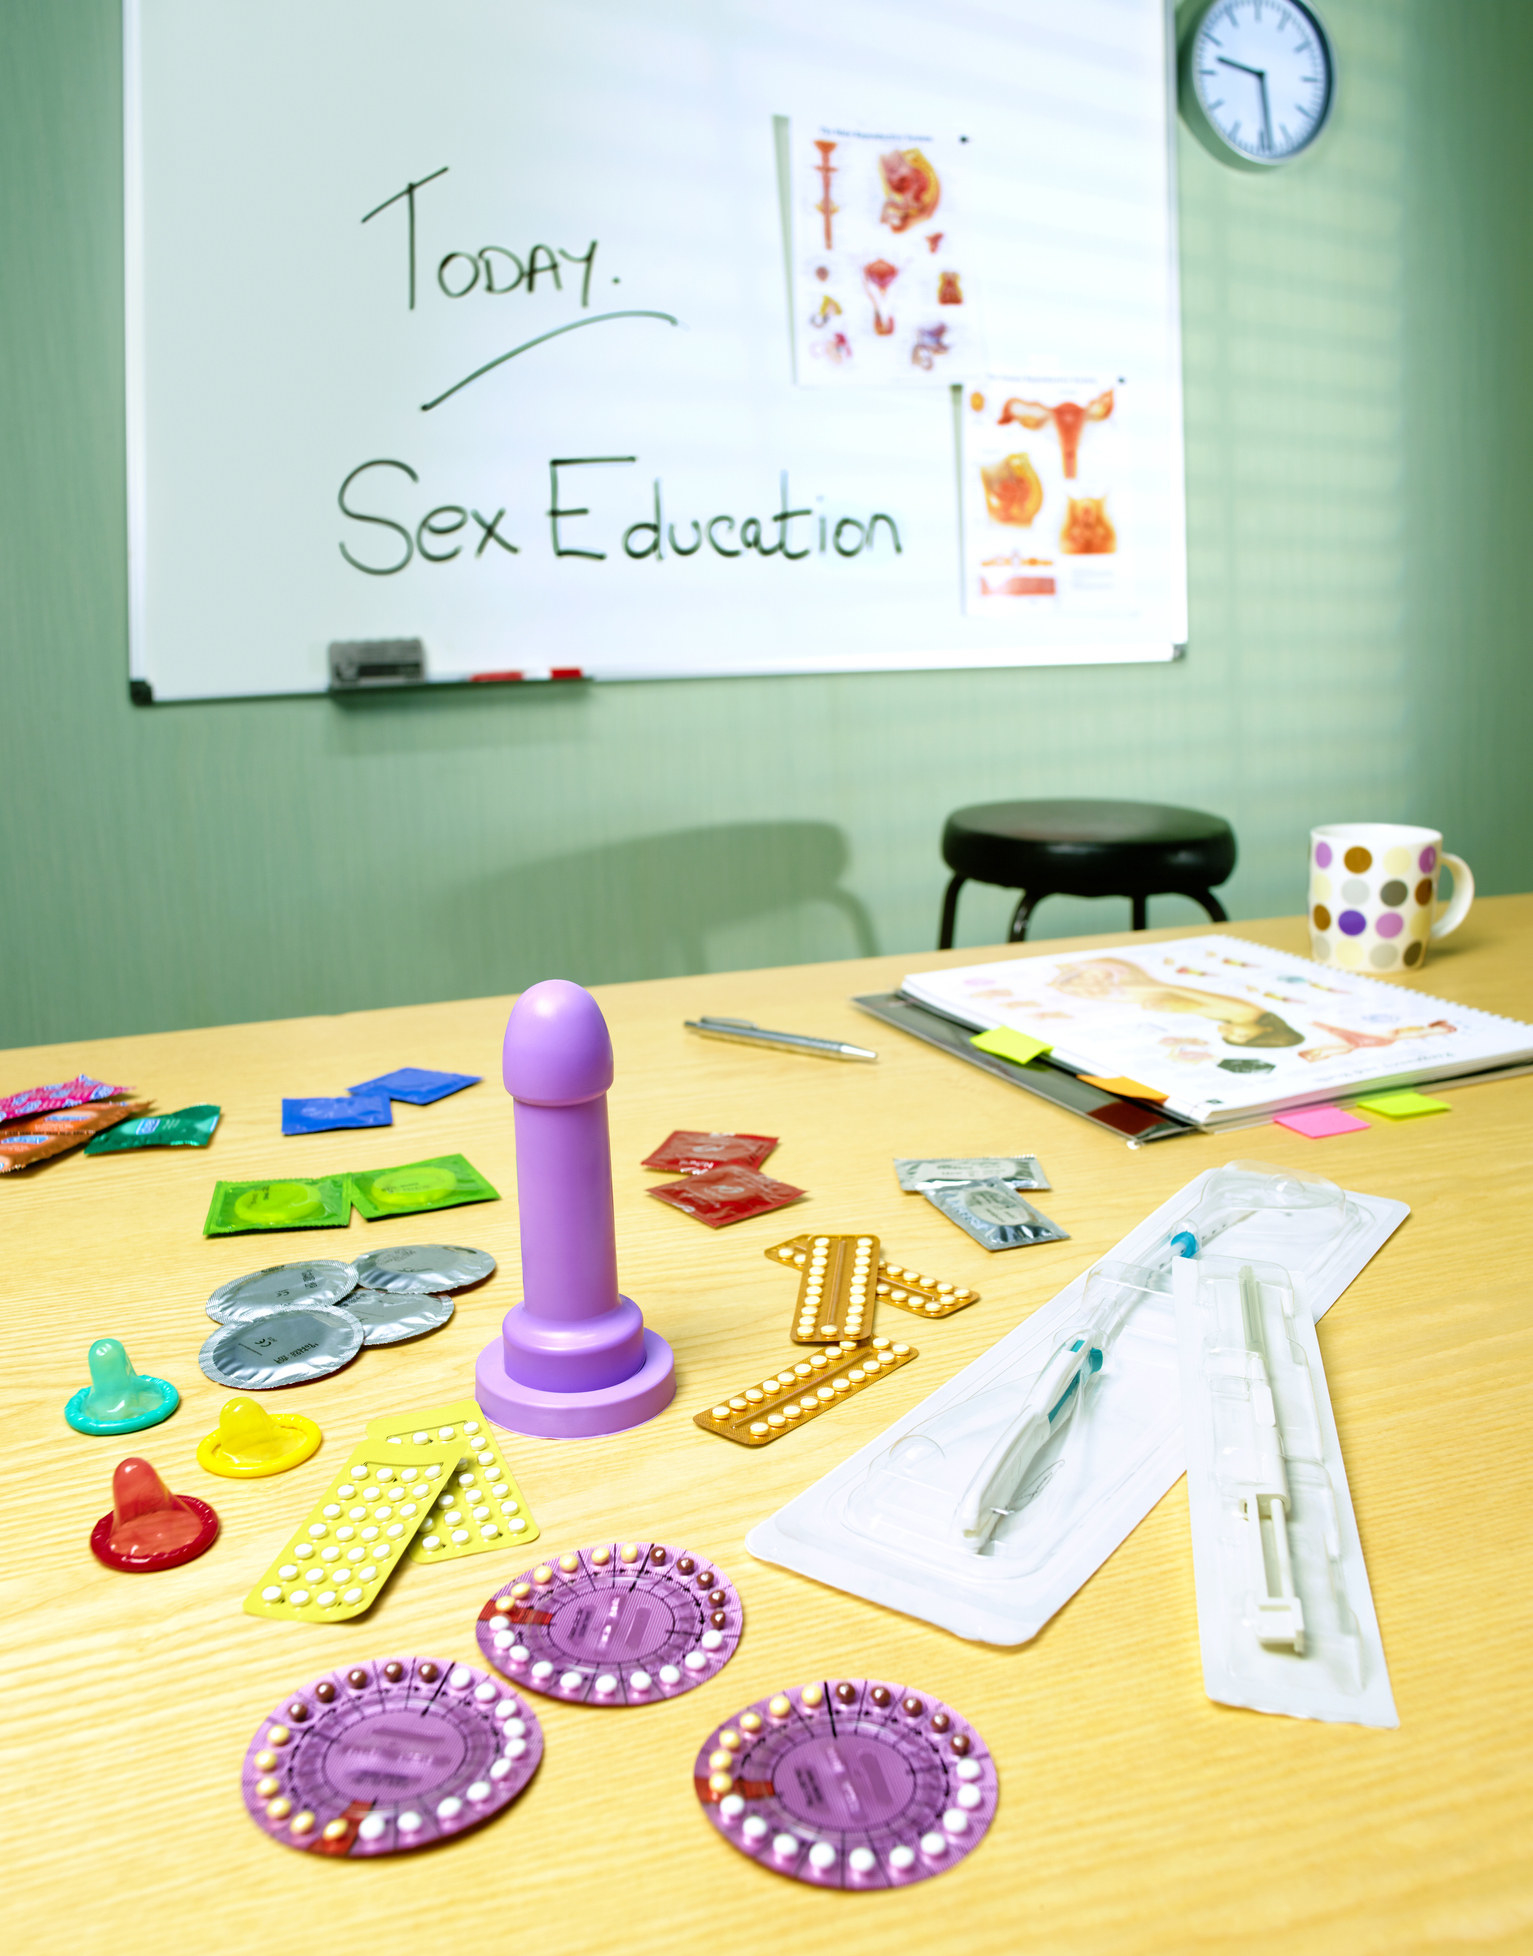 Props used for sex education on a classroom table